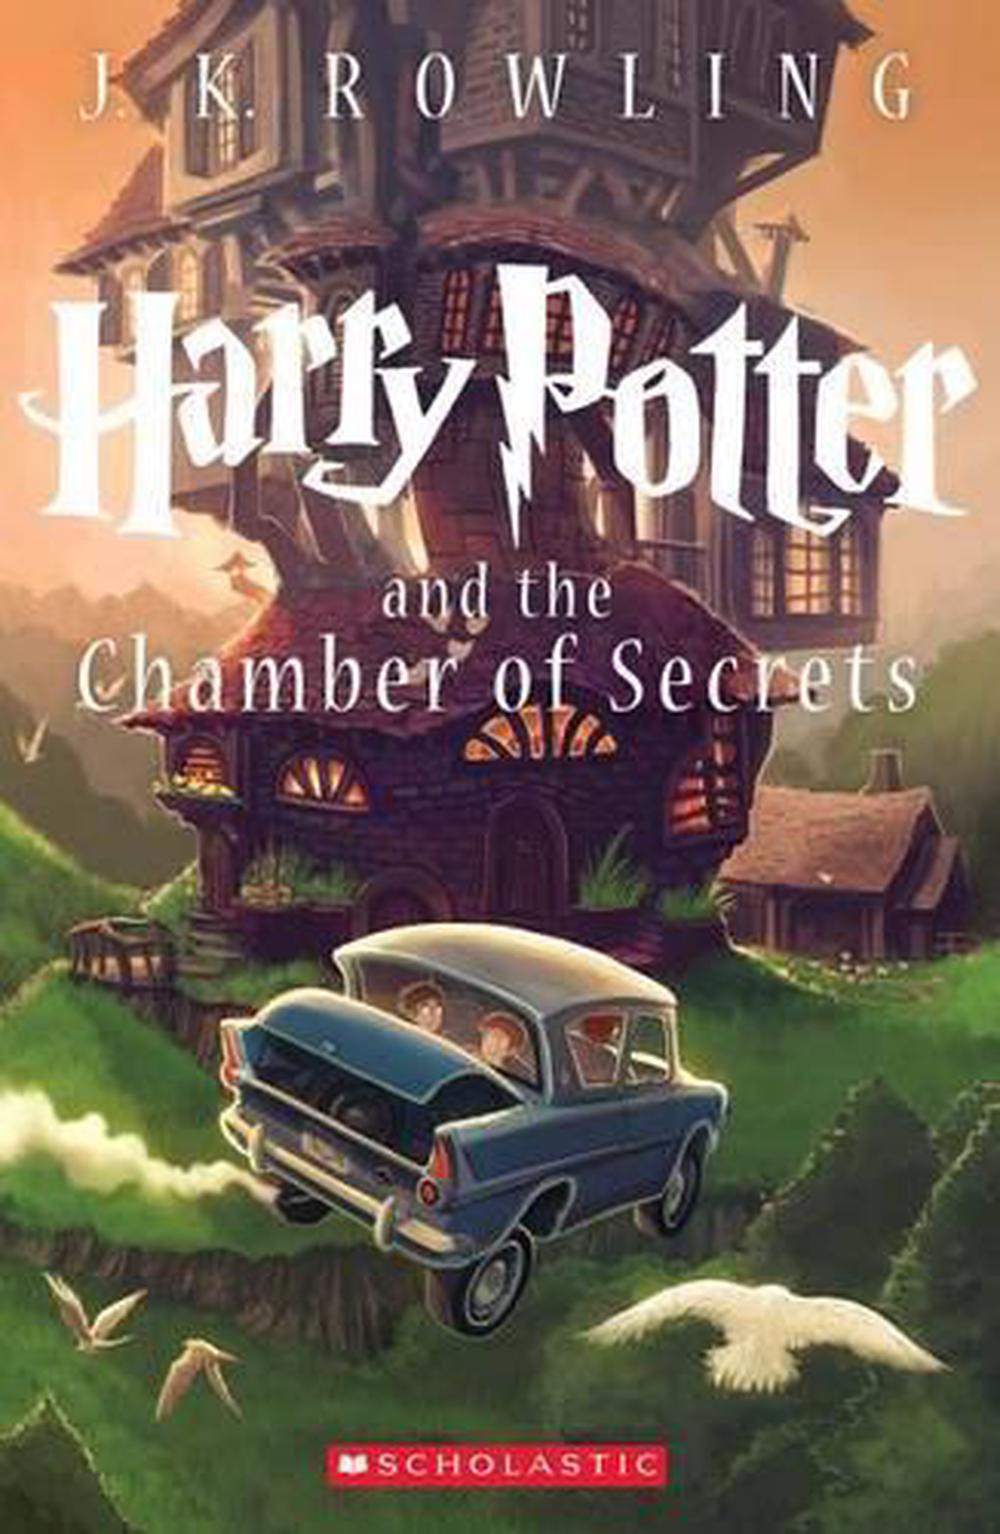 book report of harry potter and the chamber of secrets